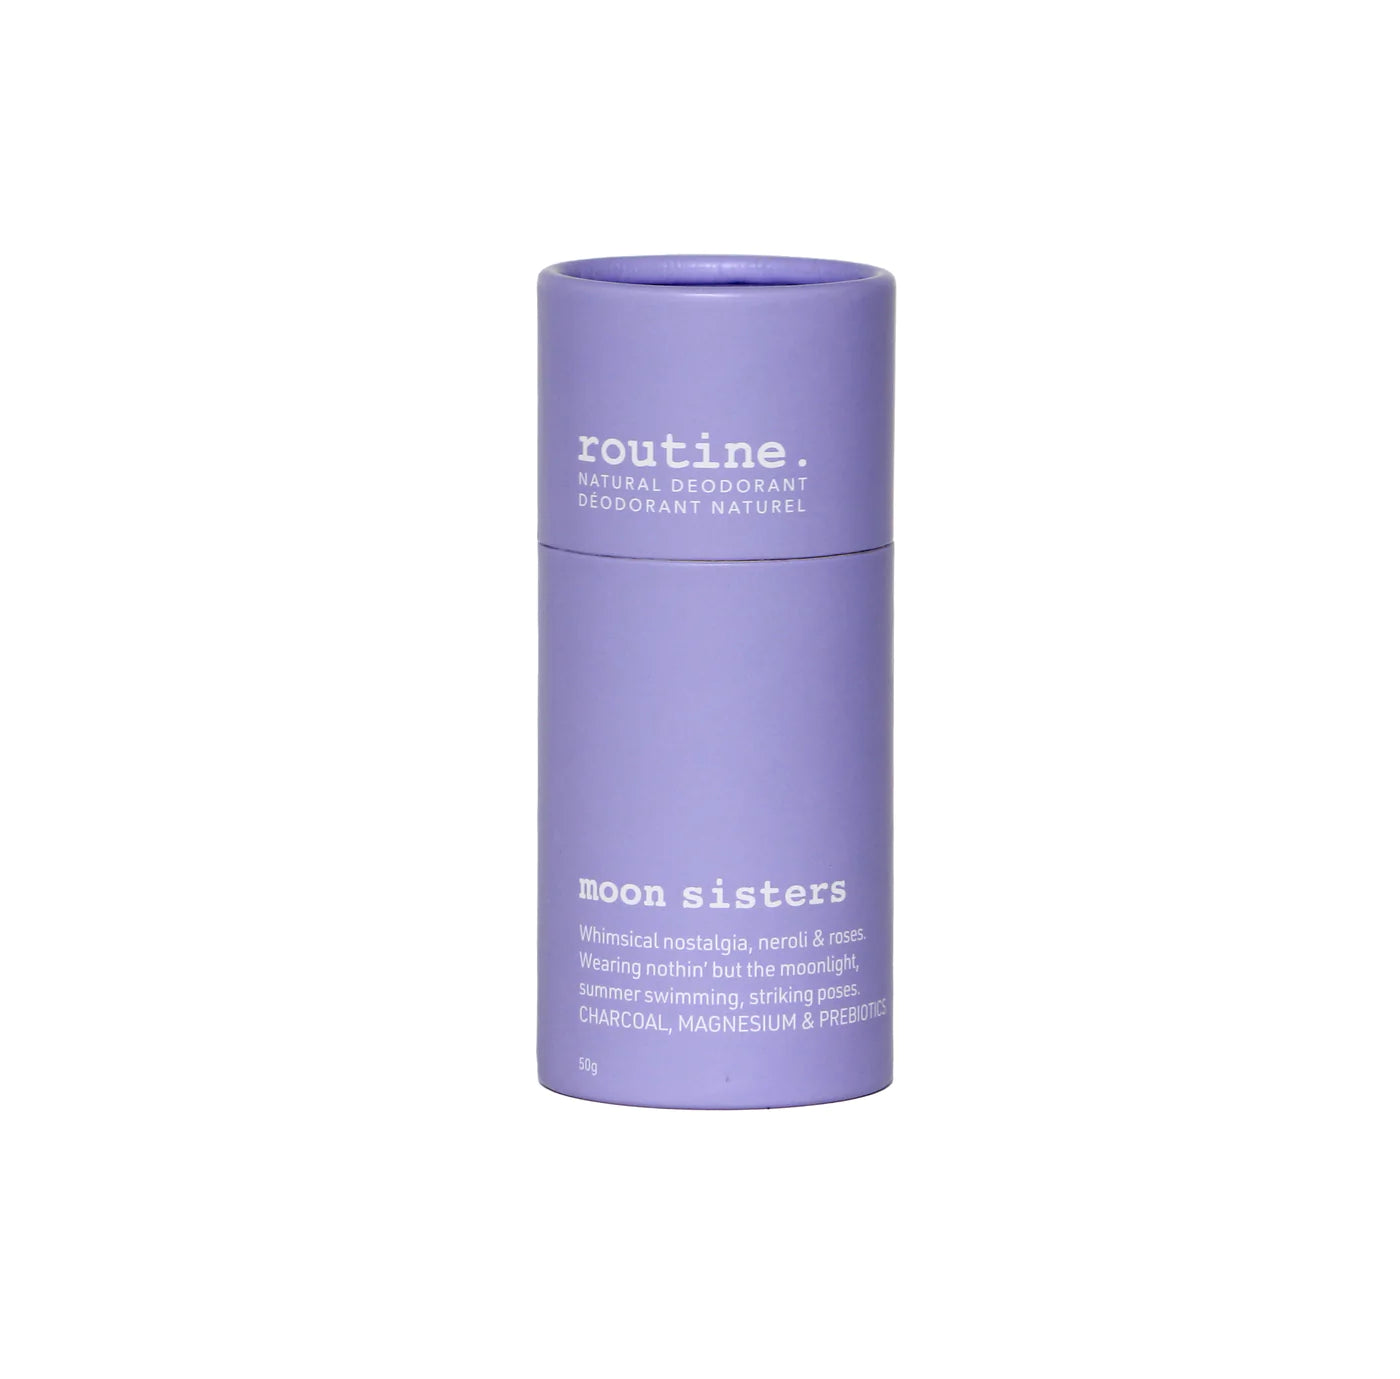 Moon Sisters - Routine Natural Deodorant Stick